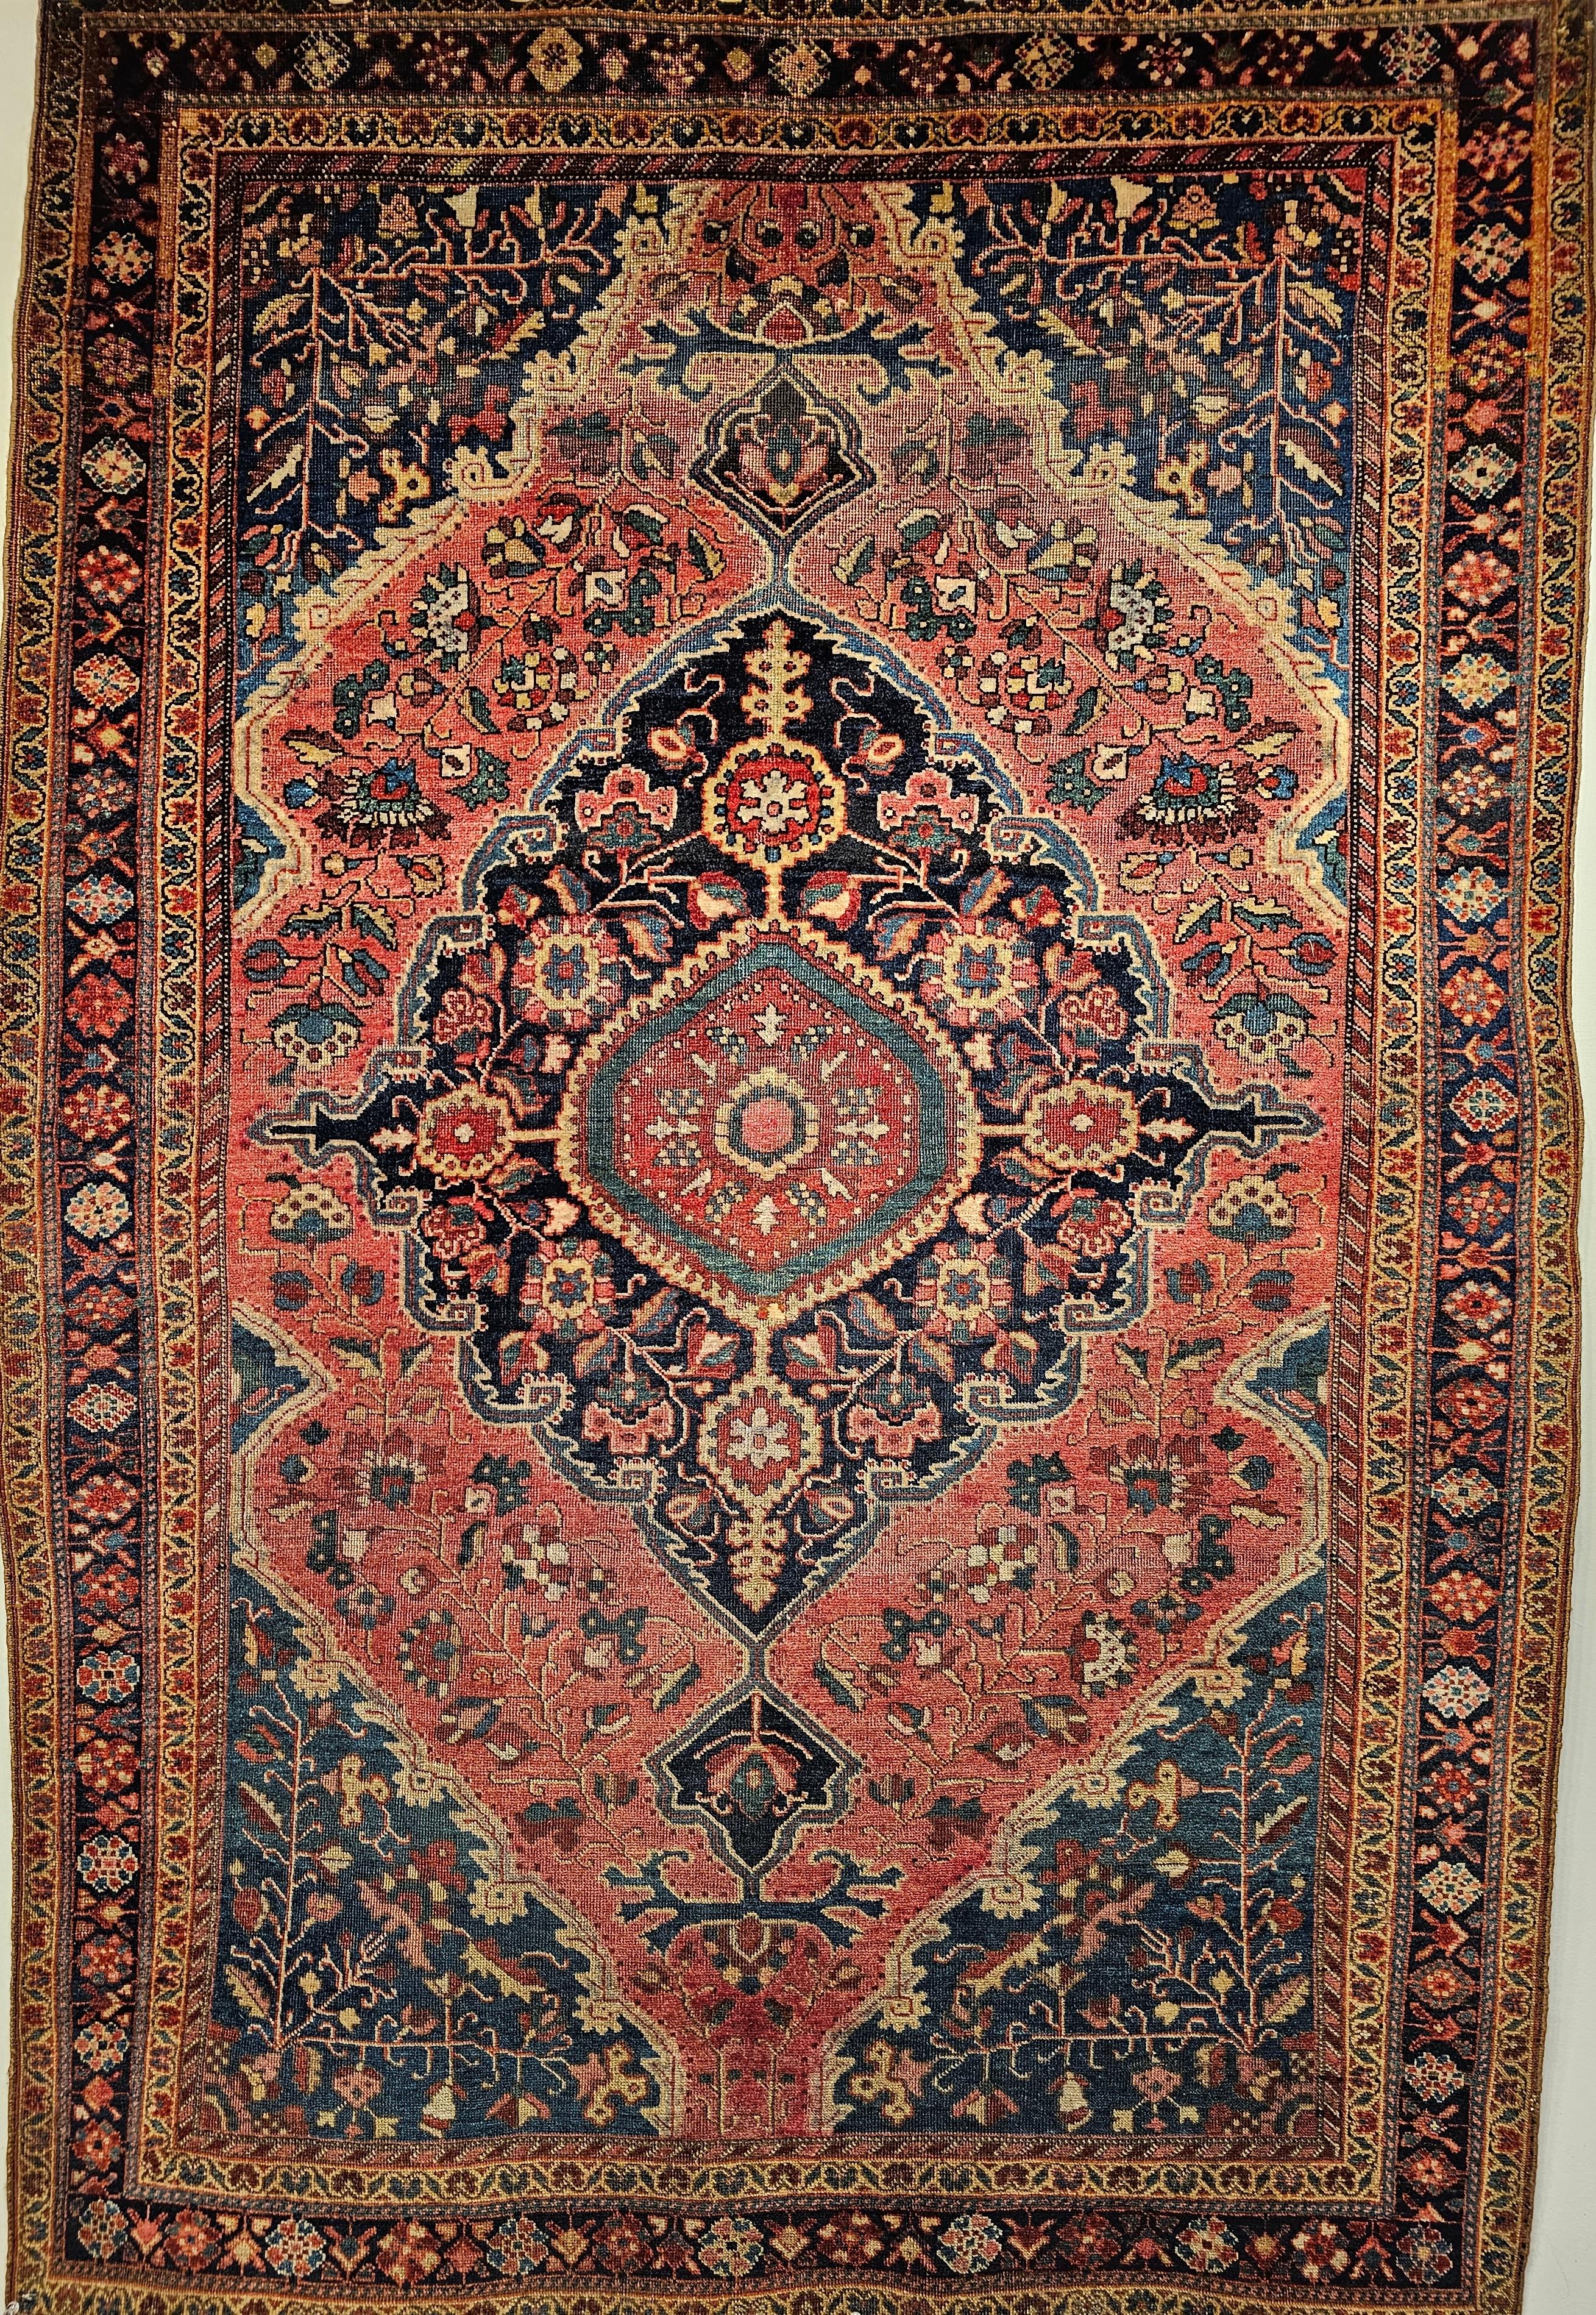 Wonderful 19th Century Persian Farahan Sarouk area rug in floral pattern with rust red, French blue, and navy blue colors.  The field is in pink or rust red color with a central medallion in navy blue. The overall floral design of the rug is